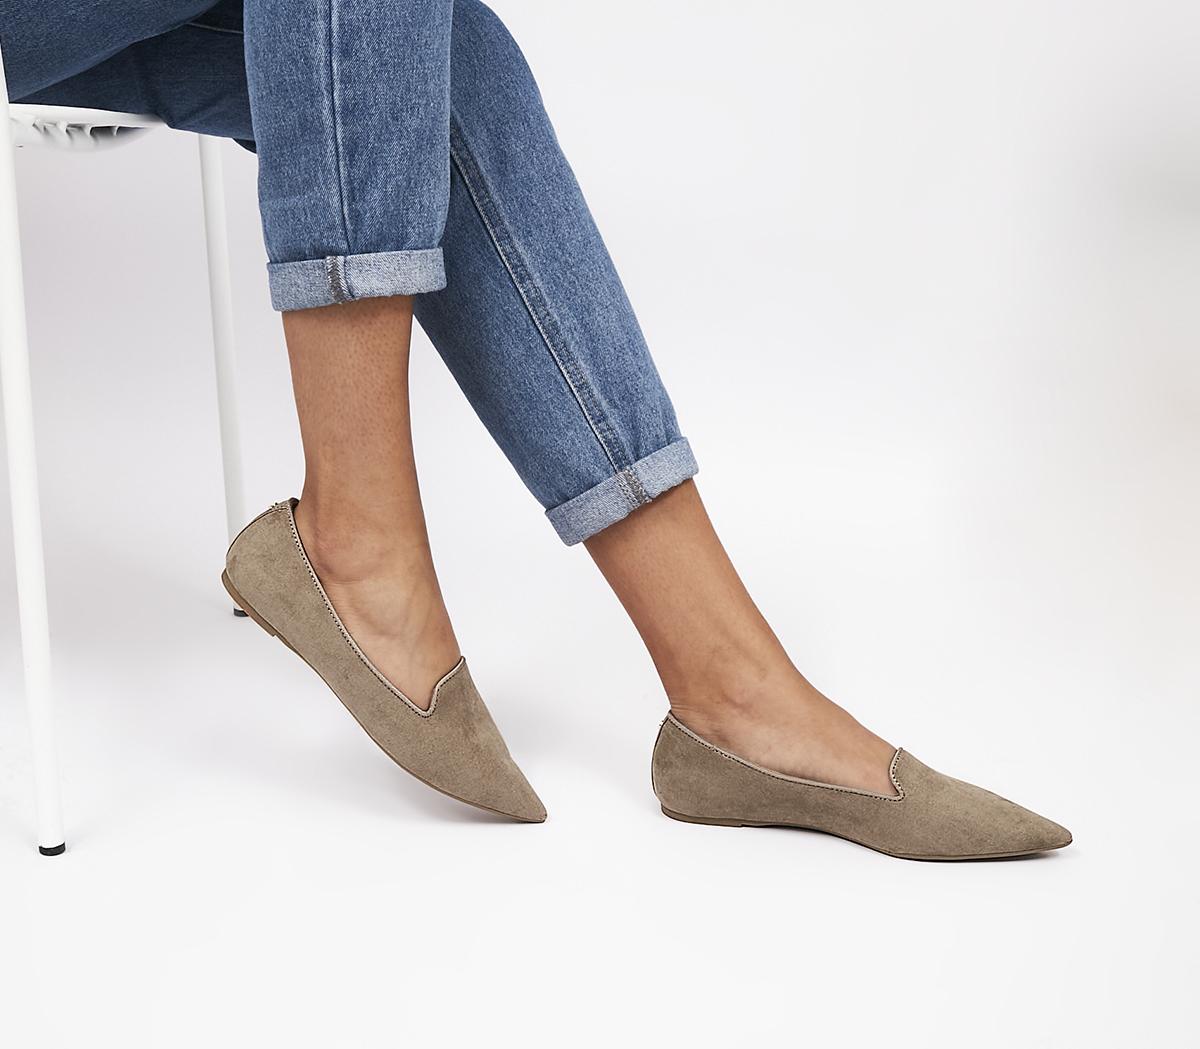 Fabulous Pointed Slipper Cut Ballet Flats Taupe